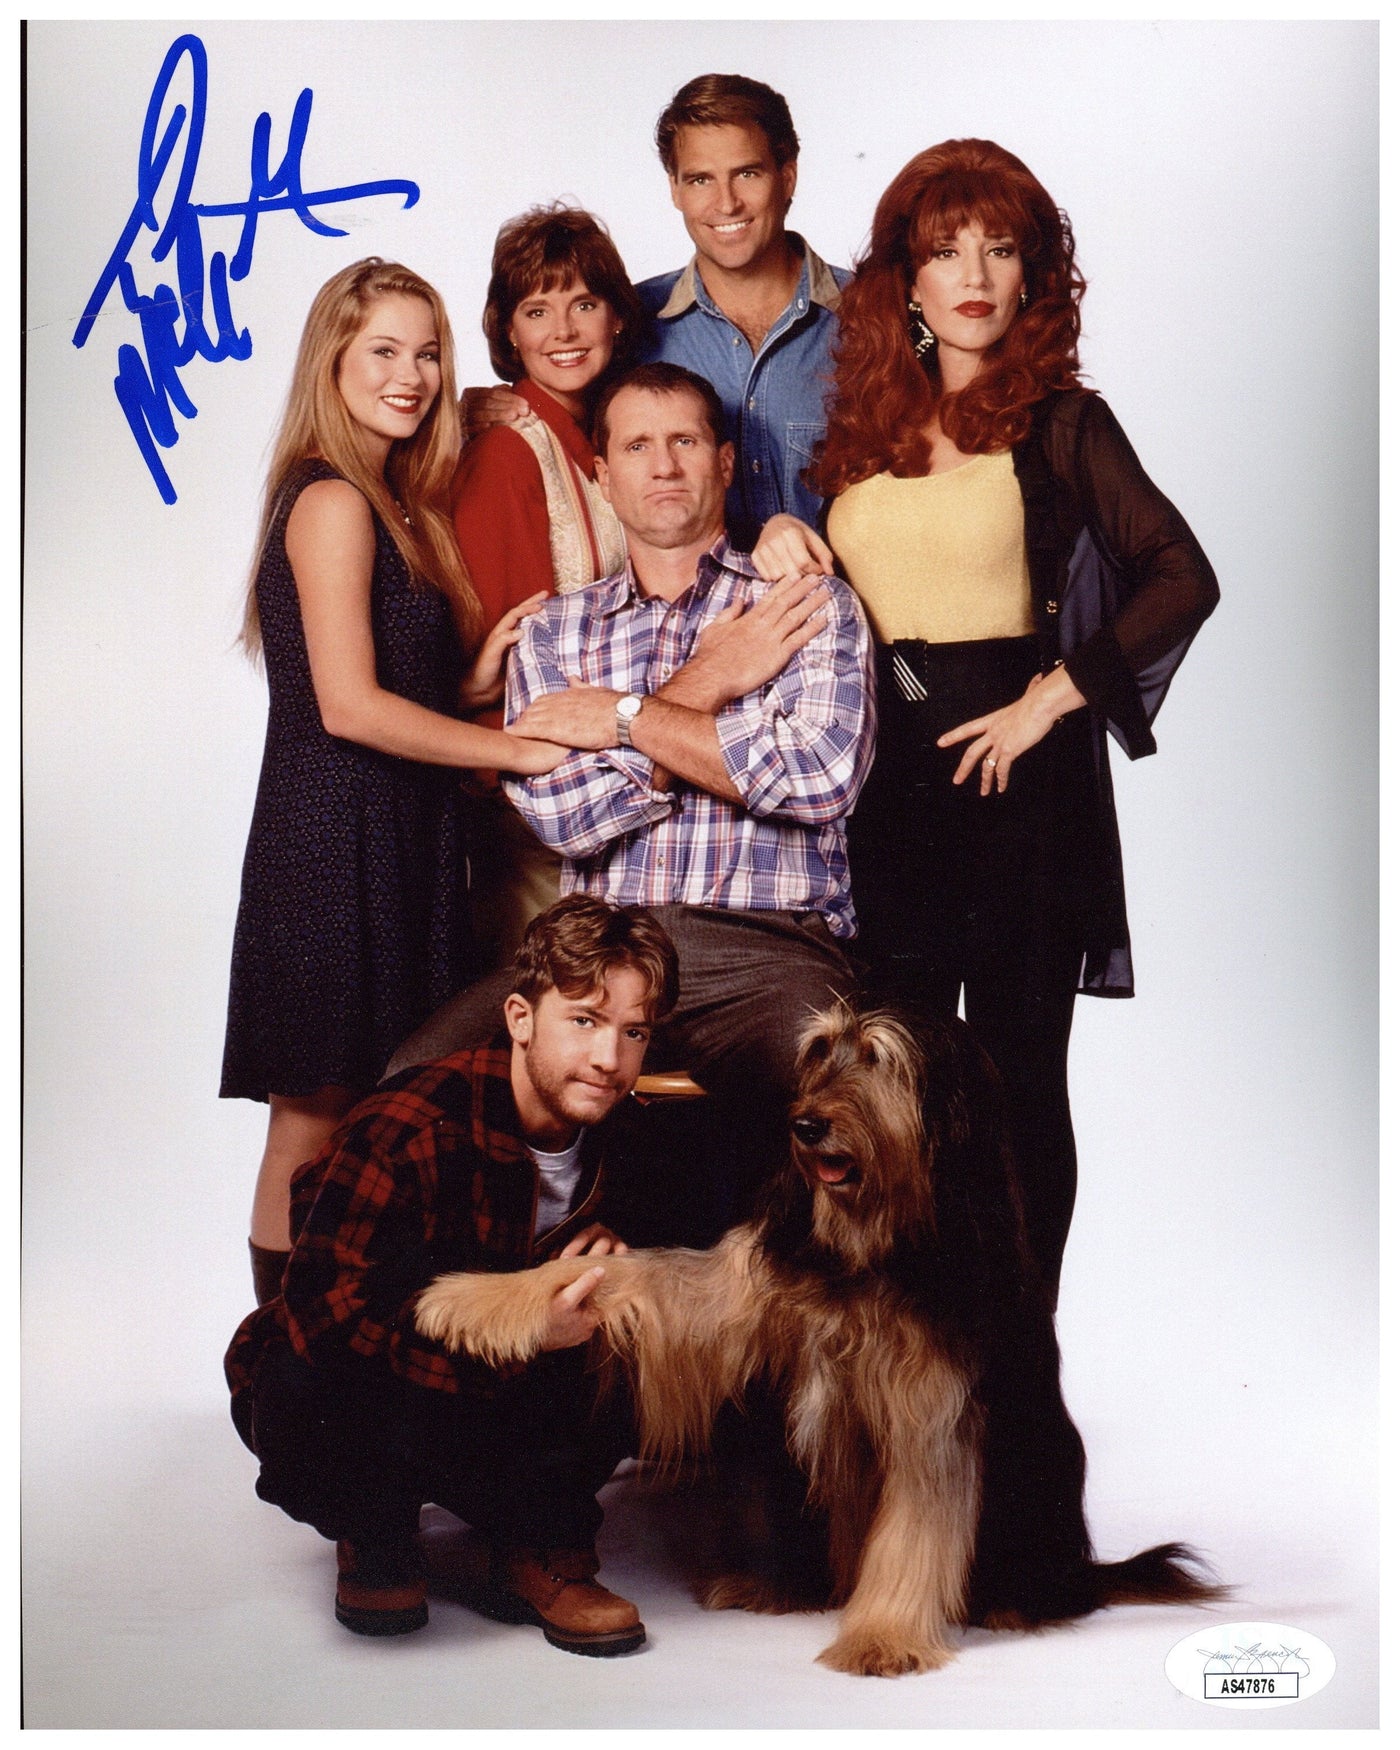 Ted McGinley Signed 8x10 Photo Married with Children Autographed JSA COA 4